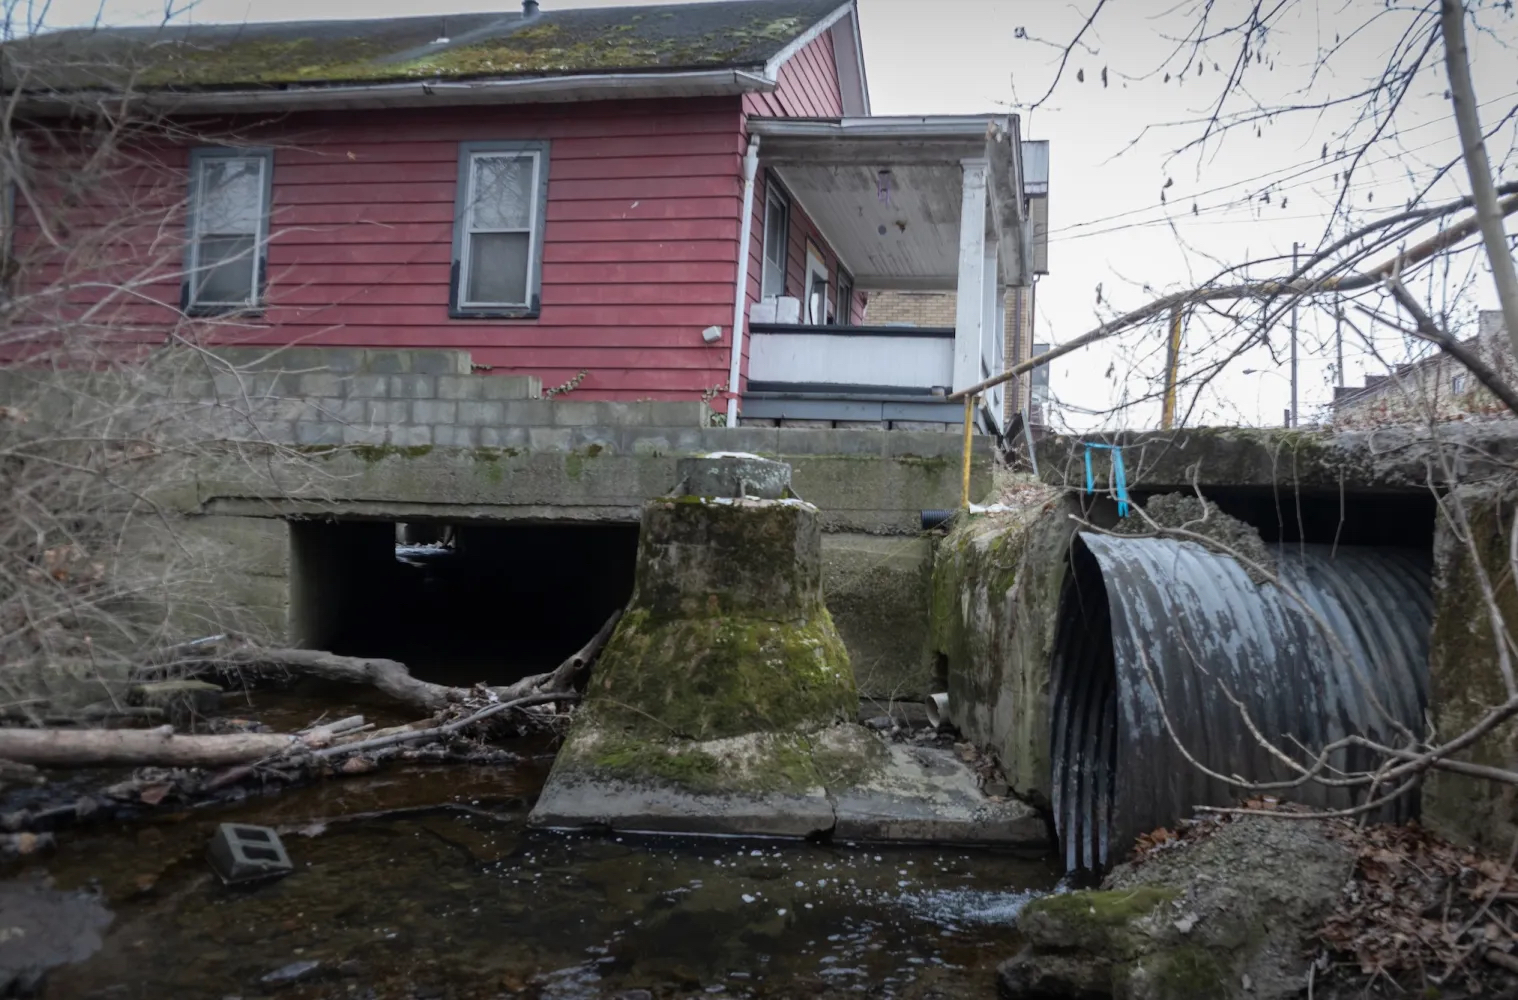 An Appalachian house with a muddy, polluted stream running underneath it.